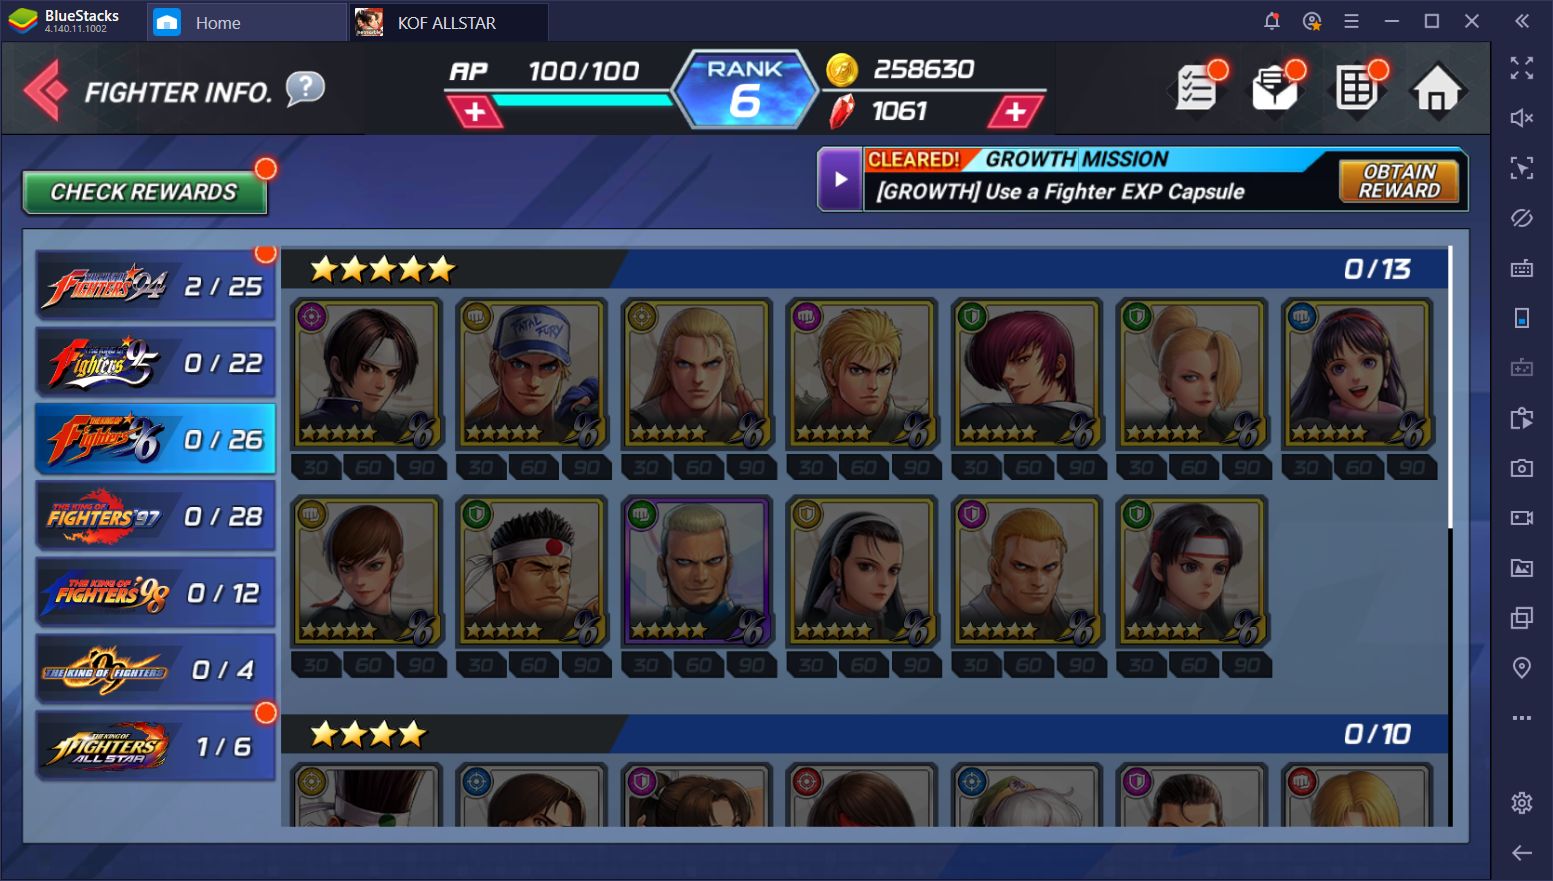 The Best Characters in King of Fighters ALLSTAR on PC